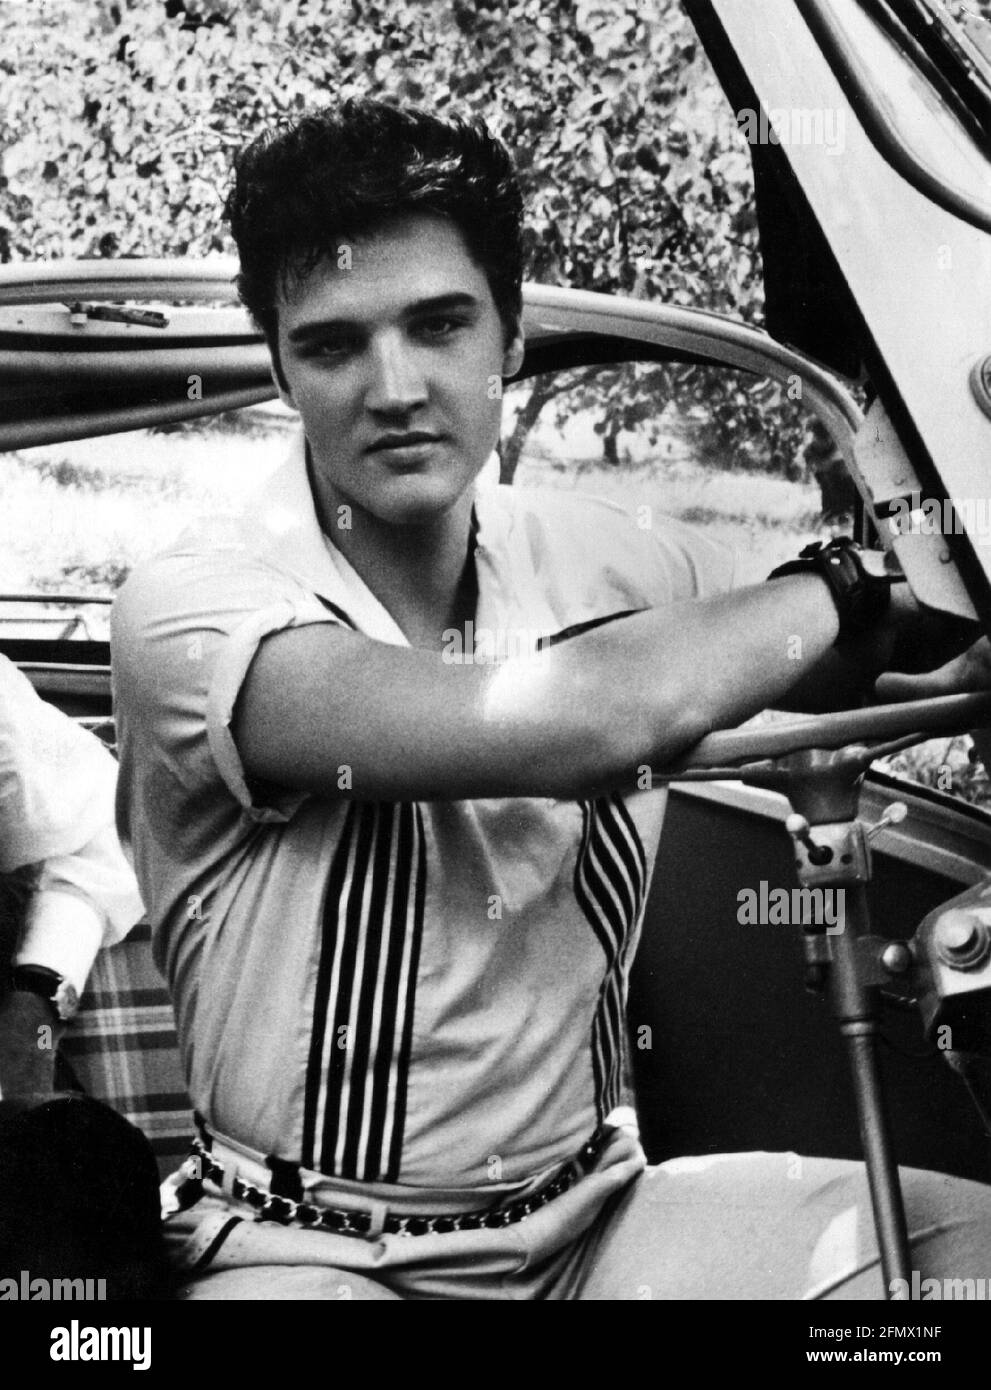 Presley, Elvis, 8.1.1935 - 16.8.1977, American singer and actor, half length, sitting in car, 1950s, ADDITIONAL-RIGHTS-CLEARANCE-INFO-NOT-AVAILABLE Stock Photo